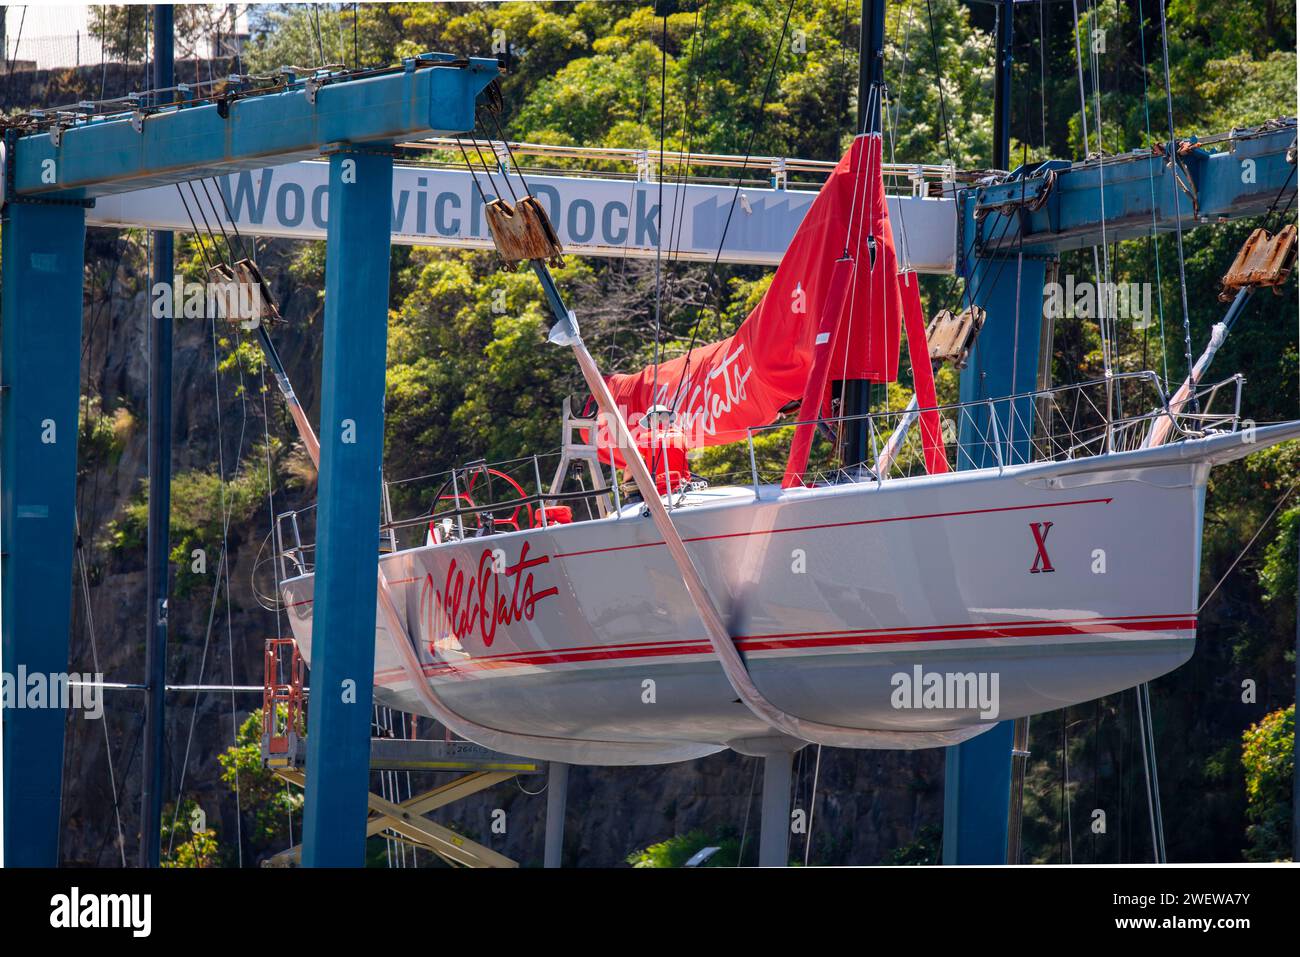 The Reichel/Pugh 66 design Wild Oats X (10) racing yacht up out of the water in a sling at Woolwich Dock in Sydney, Australia Stock Photo